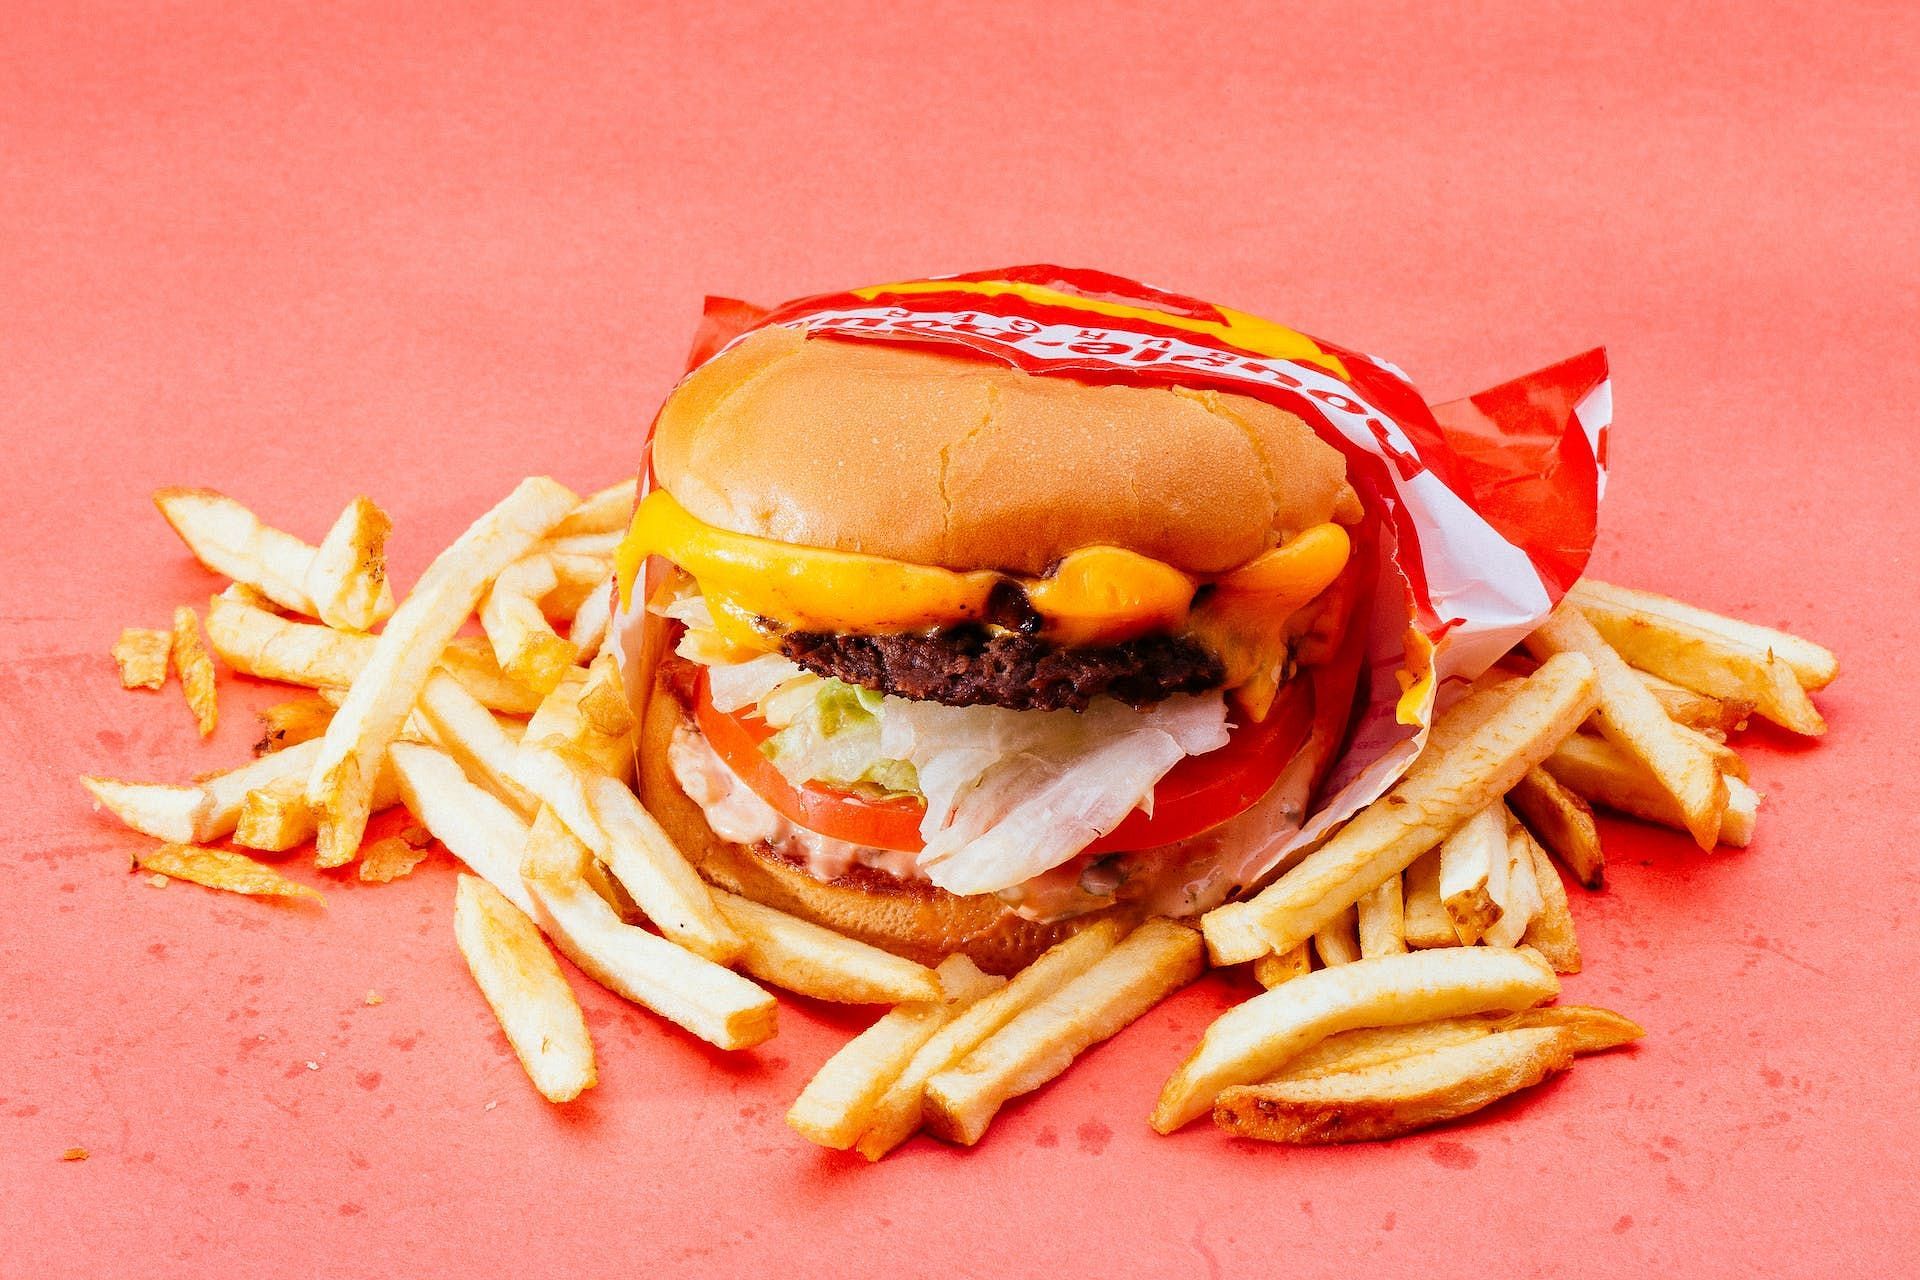 Fast foods are packed with refined carbohydrates. (Image via Pexels/Isaac Taylor)